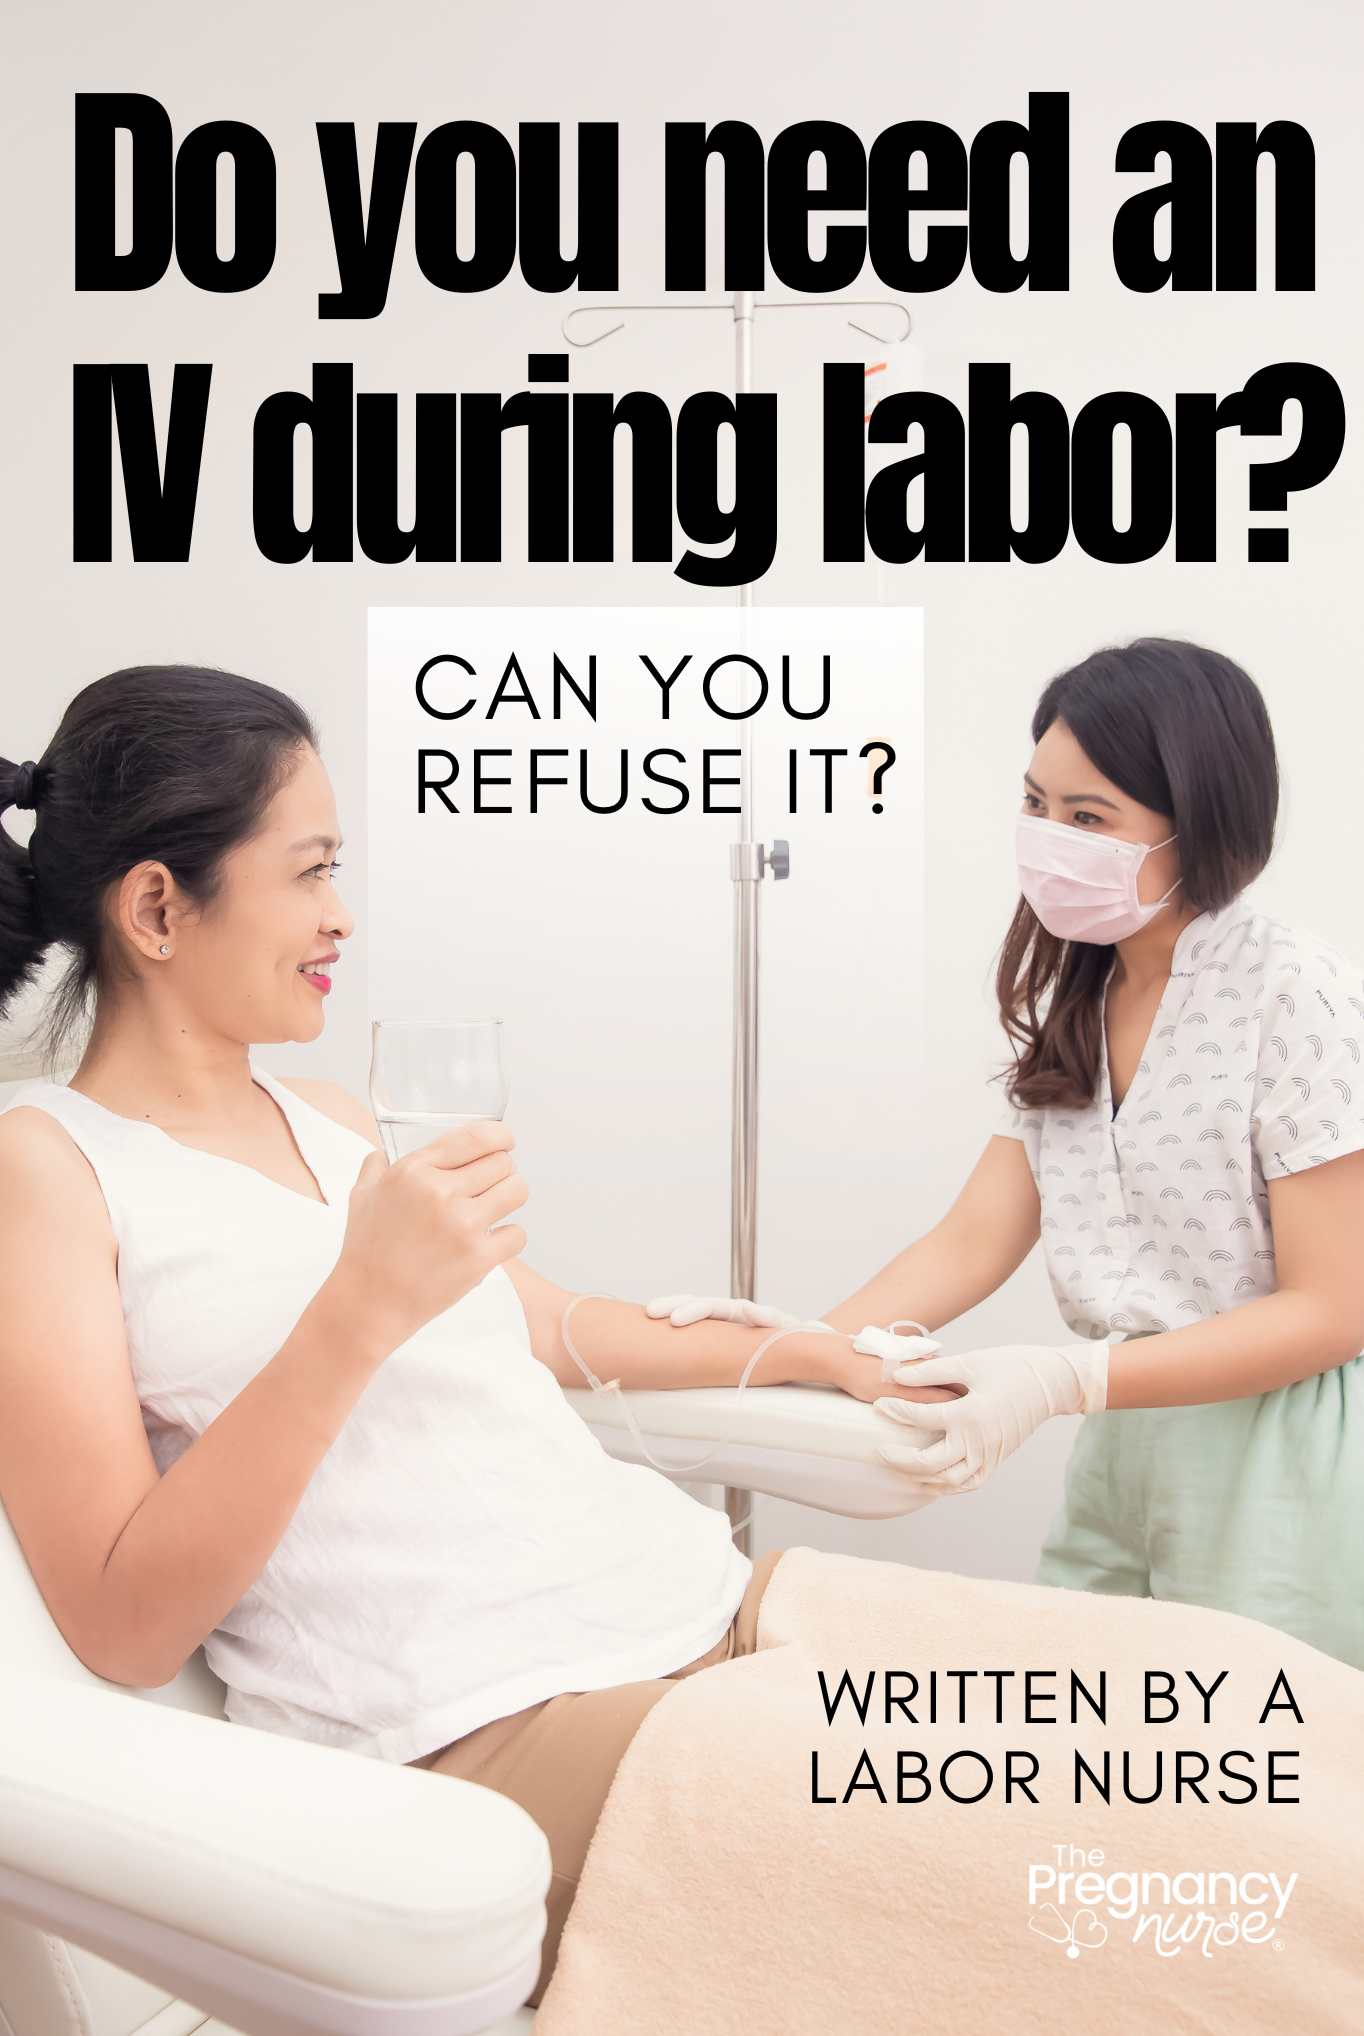 Labor and delivery is a place where a nurse will put an IV into your hand, sometimes to induce you or to get you through the stages of labor. The contractions will naturally induce you. Don't forget some snacks if you want them. Preparing for labor means understanding why you might need an IV. The IV pole is often part of the labor and delivery room. 24 hours before delivery you will want to get hydrated so that your IV is easier to place.